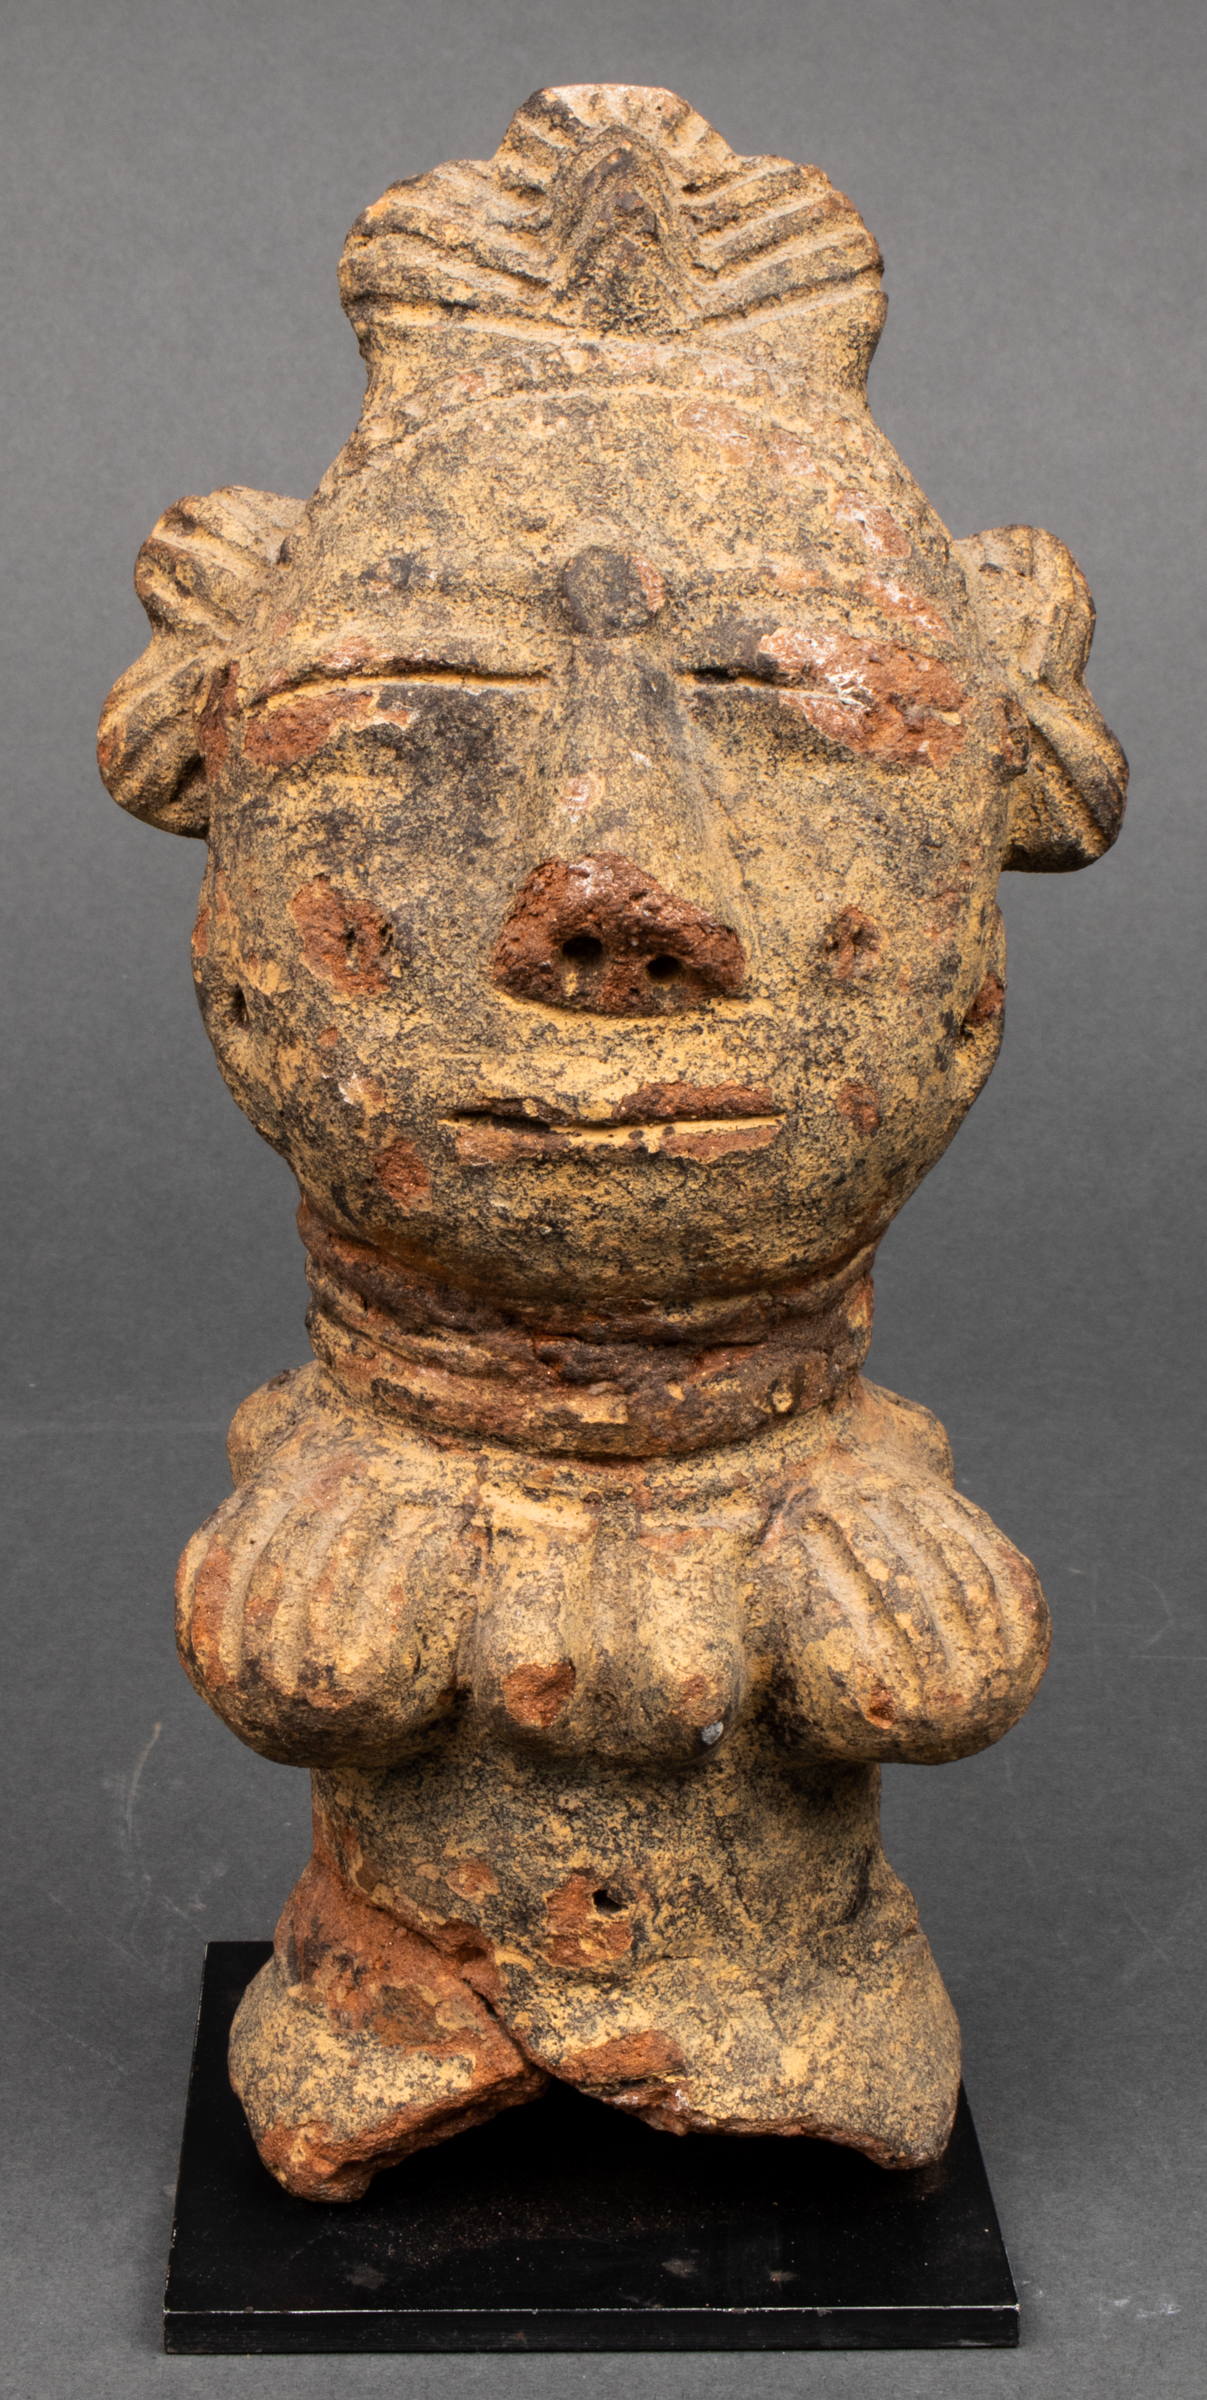 AFRICAN POTTERY FIGURE FRAGMENT 3c30a5